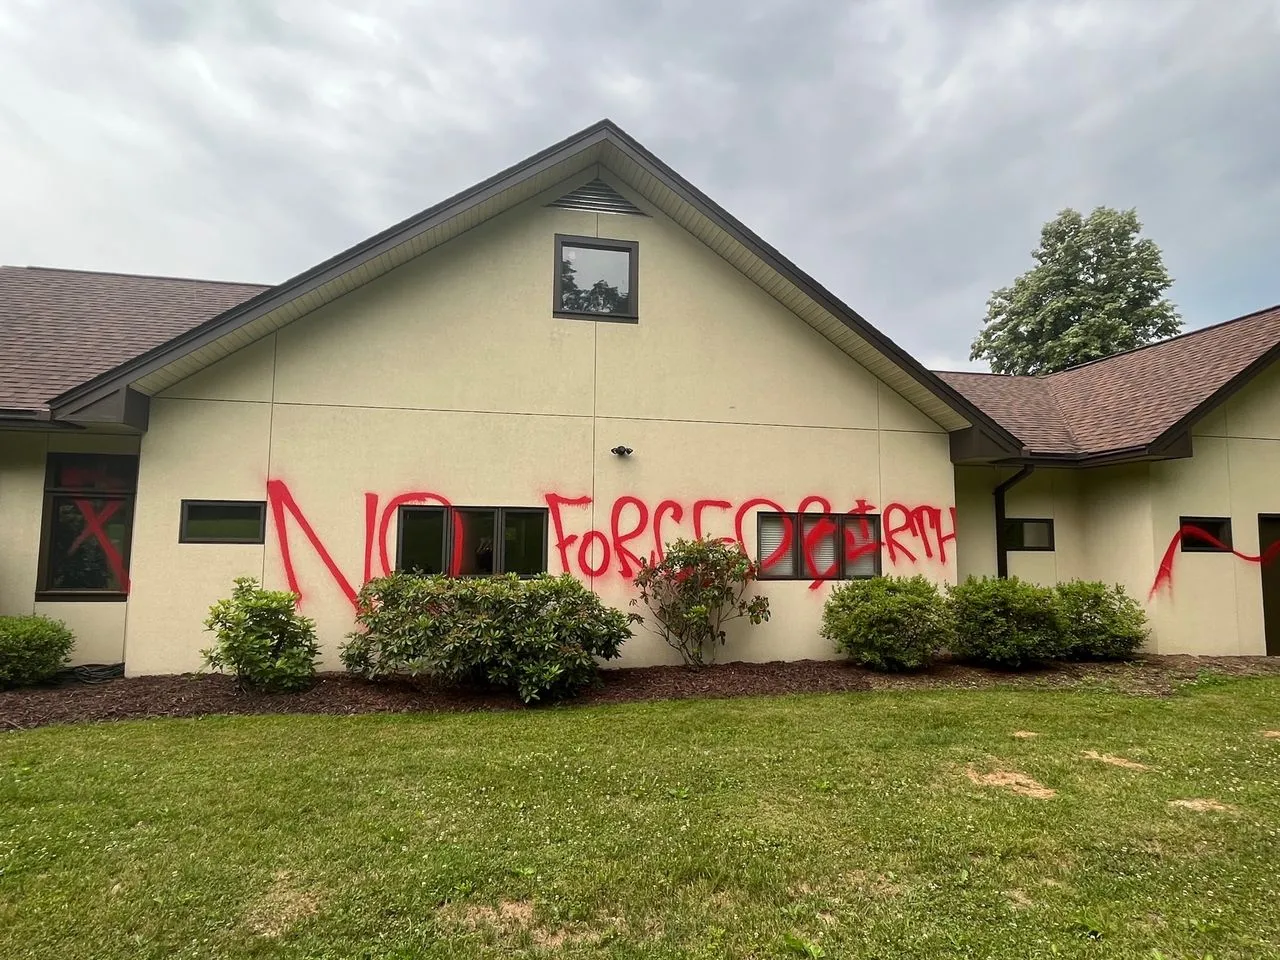 Mountain Area Pregnancy Services, a pro-life pregnancy center in Asheville, North Carolina, had its windows smashed and was spray-painted with pro-abortion messaging on June 6 or June 7, 2022.?w=200&h=150